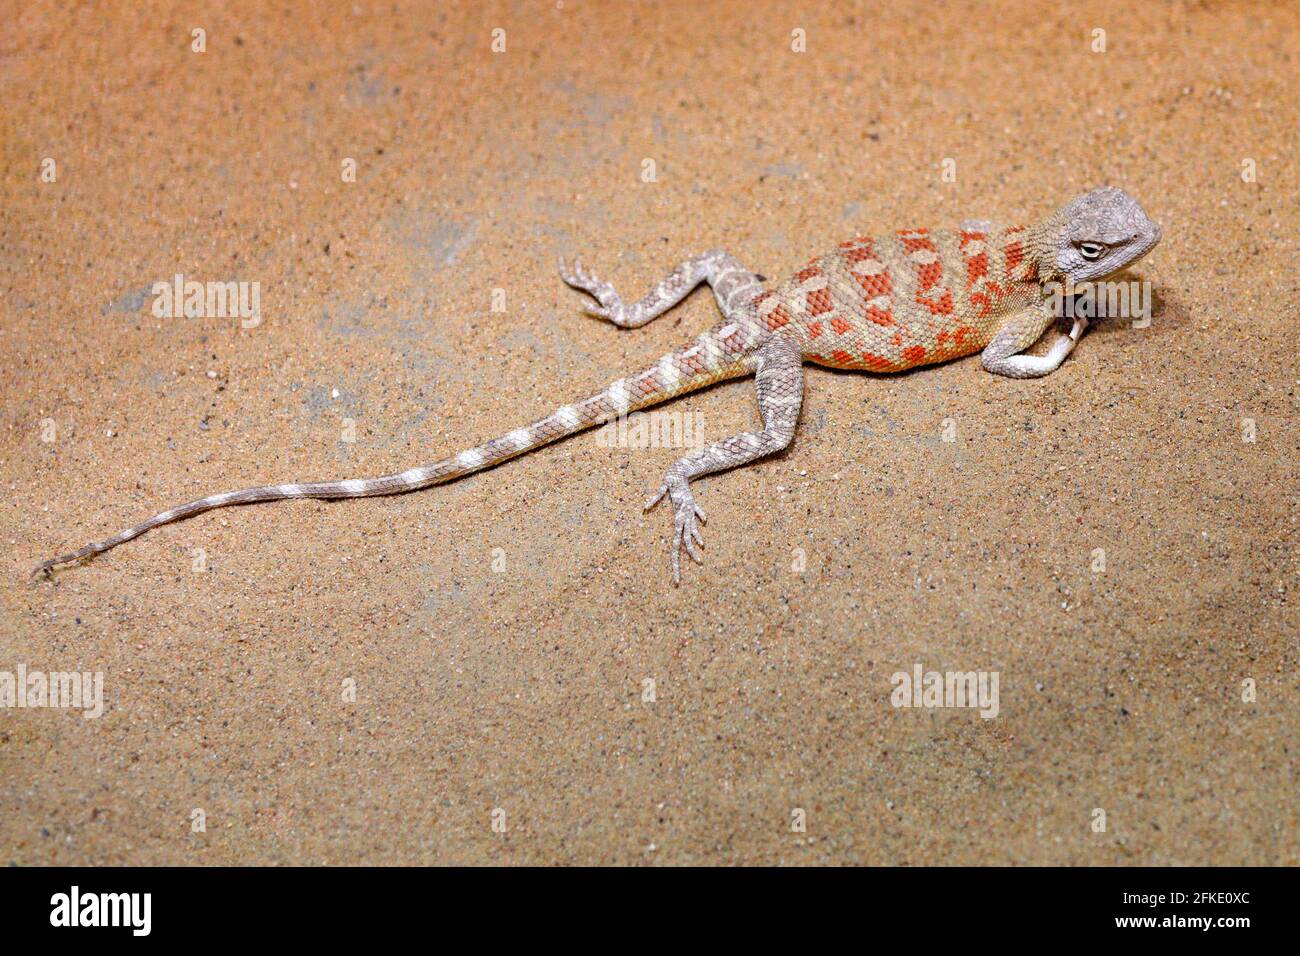 Steppe Agama, Trapelus sanguinolentus from Russa and Kazakhstan. Reptile from the nature desert habitat. Hot sunny day in Asia. Wildlife nature with l Stock Photo